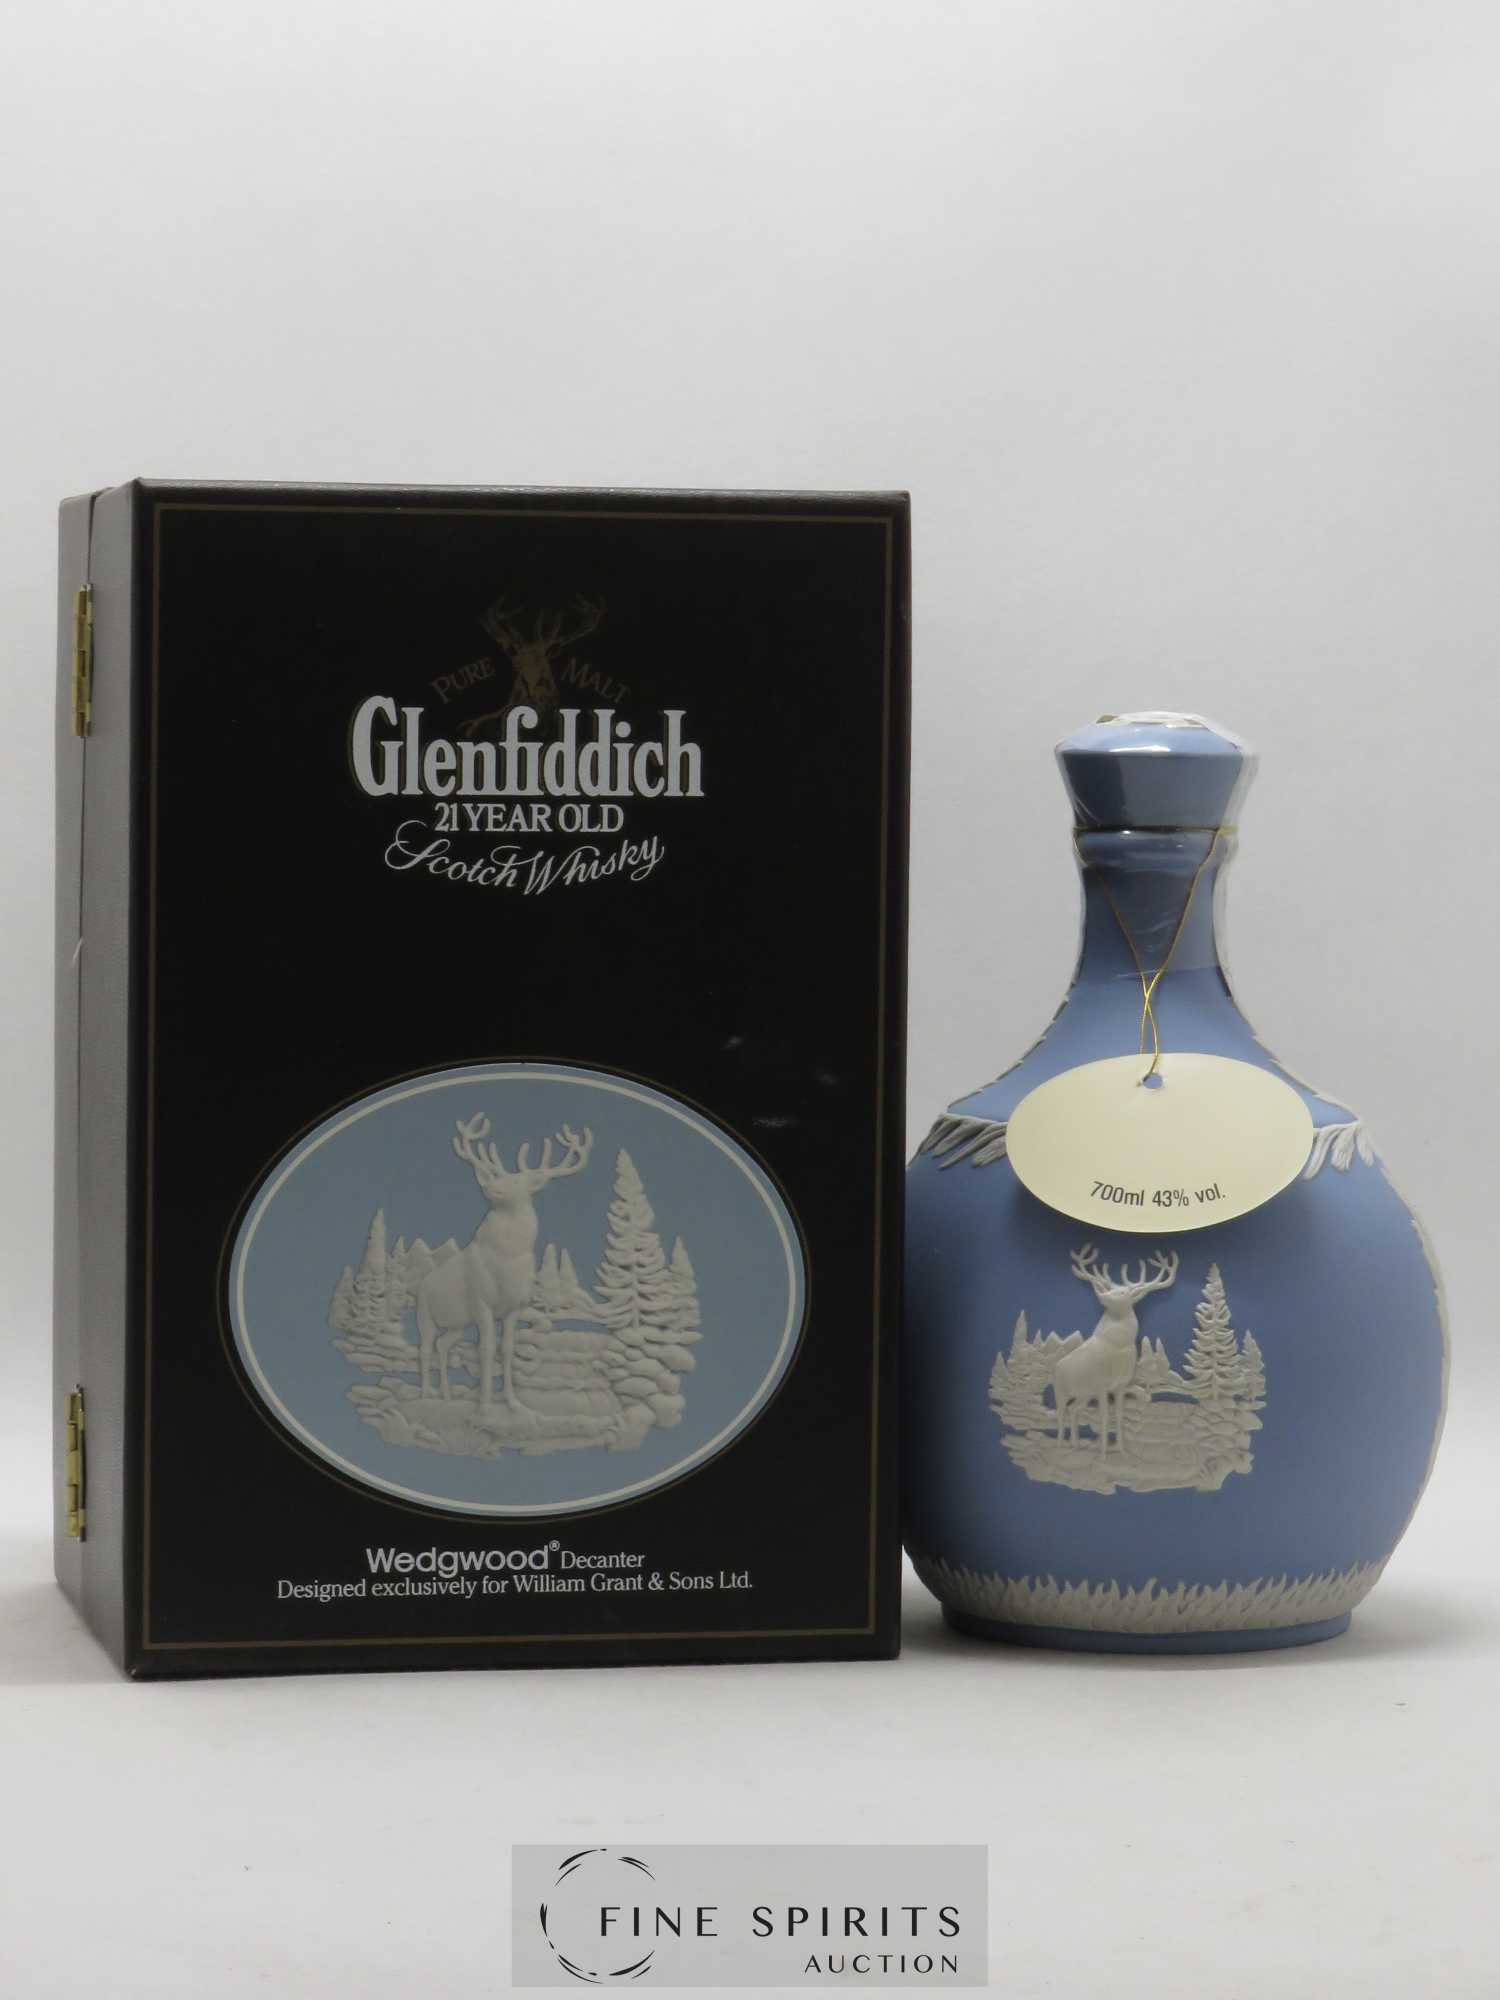 Buy Glenfiddich 21 years Of. Wedgwood Decanter Limited Edition Pure Malt  Scotch Whisky (lot: B2176825-3040)